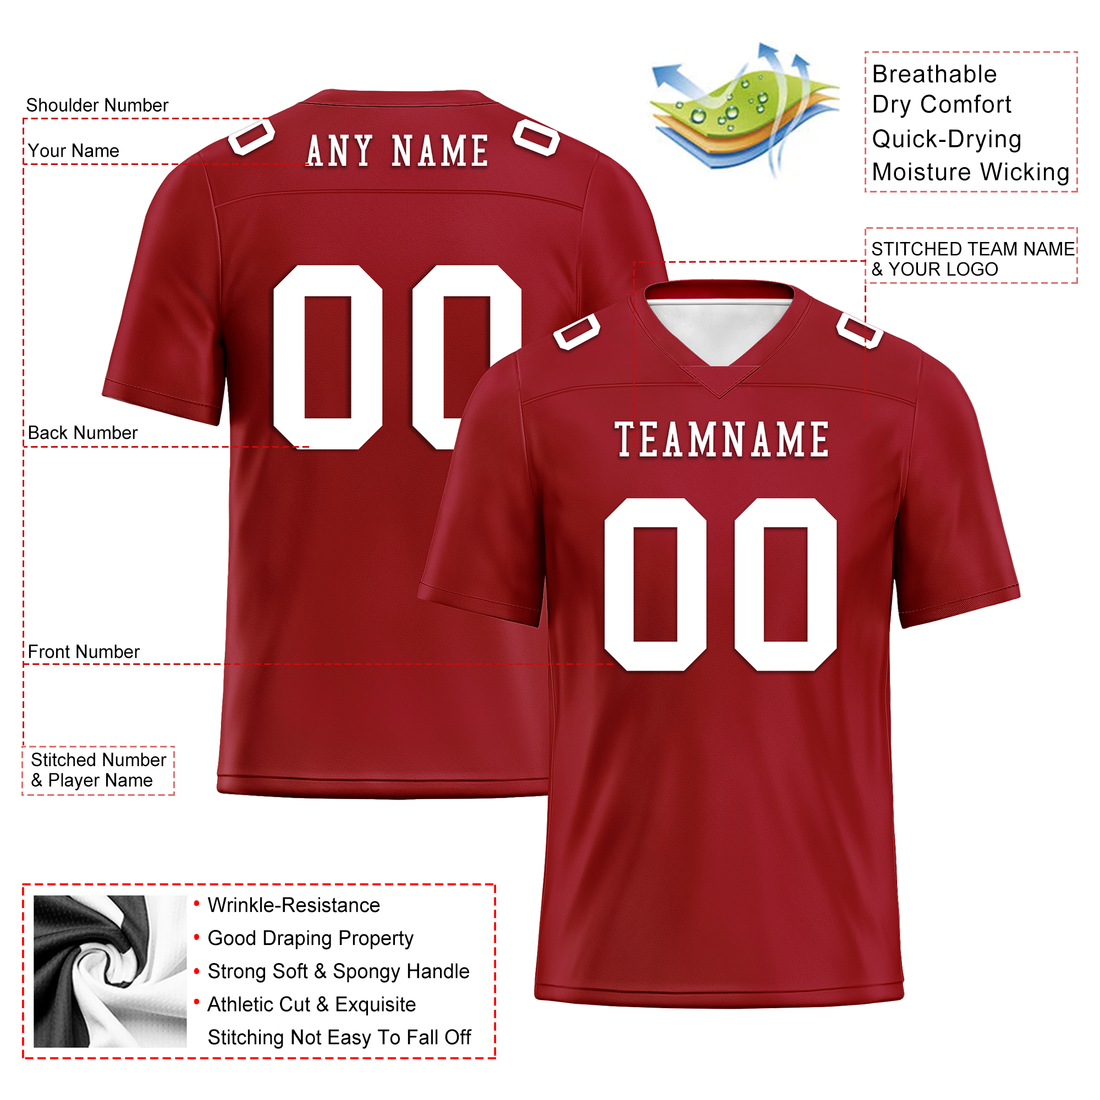 Custom Red Classic Style Personalized Authentic Football Jersey FBJ02-bd0a700a